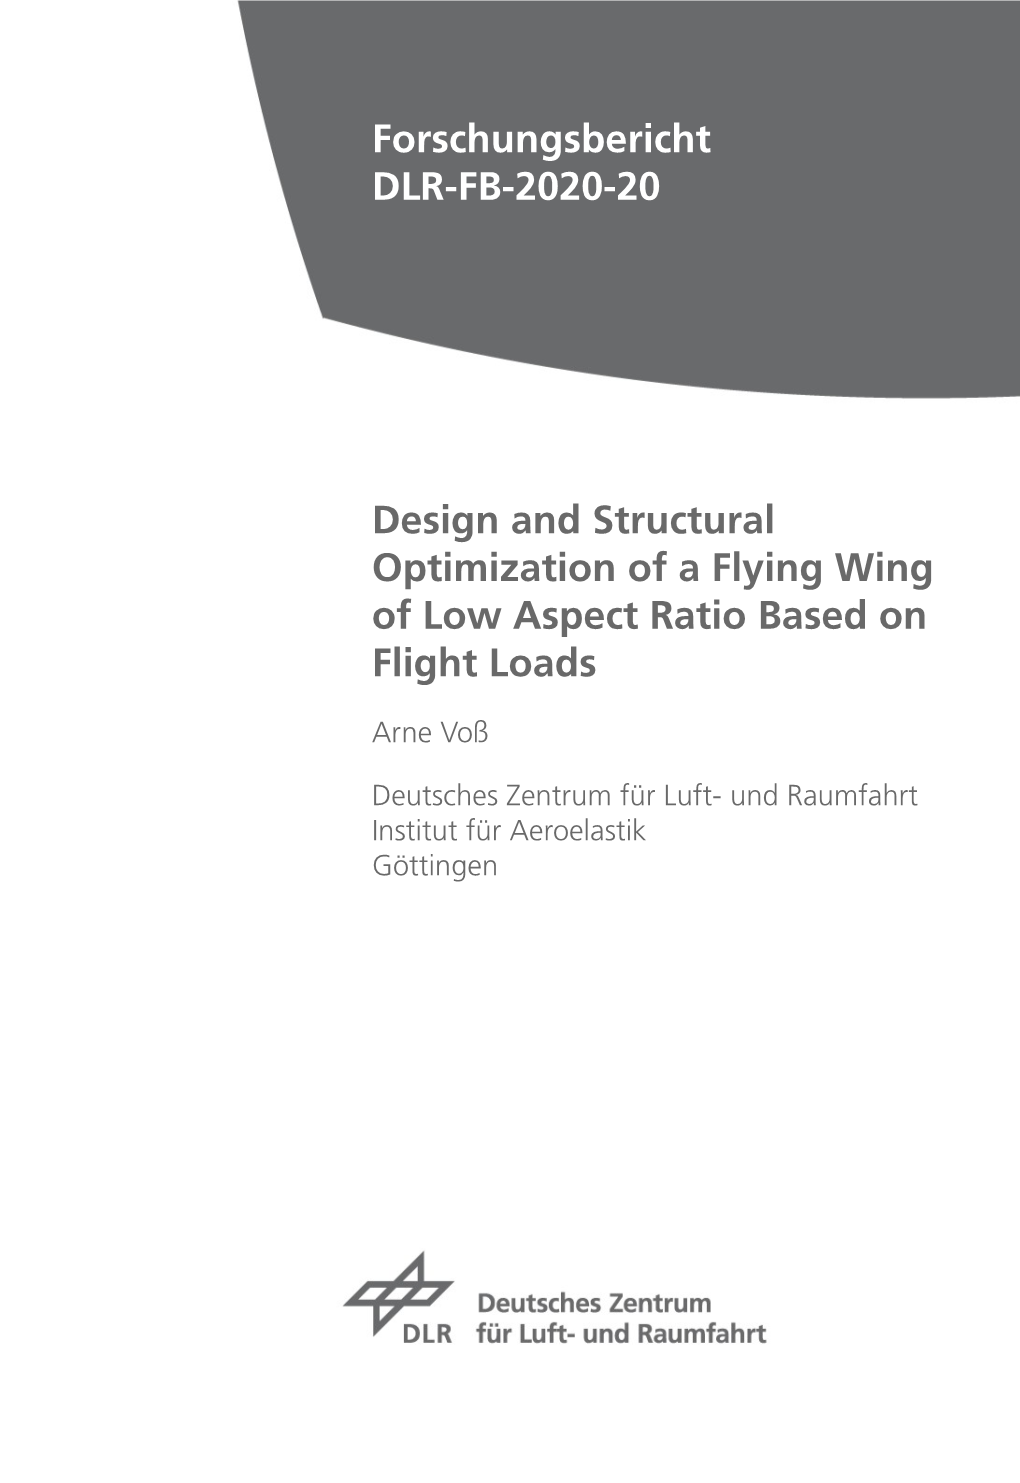 Design and Structural Optimization of a Flying Wing of Low Aspect Ratio Based on Flight Loads